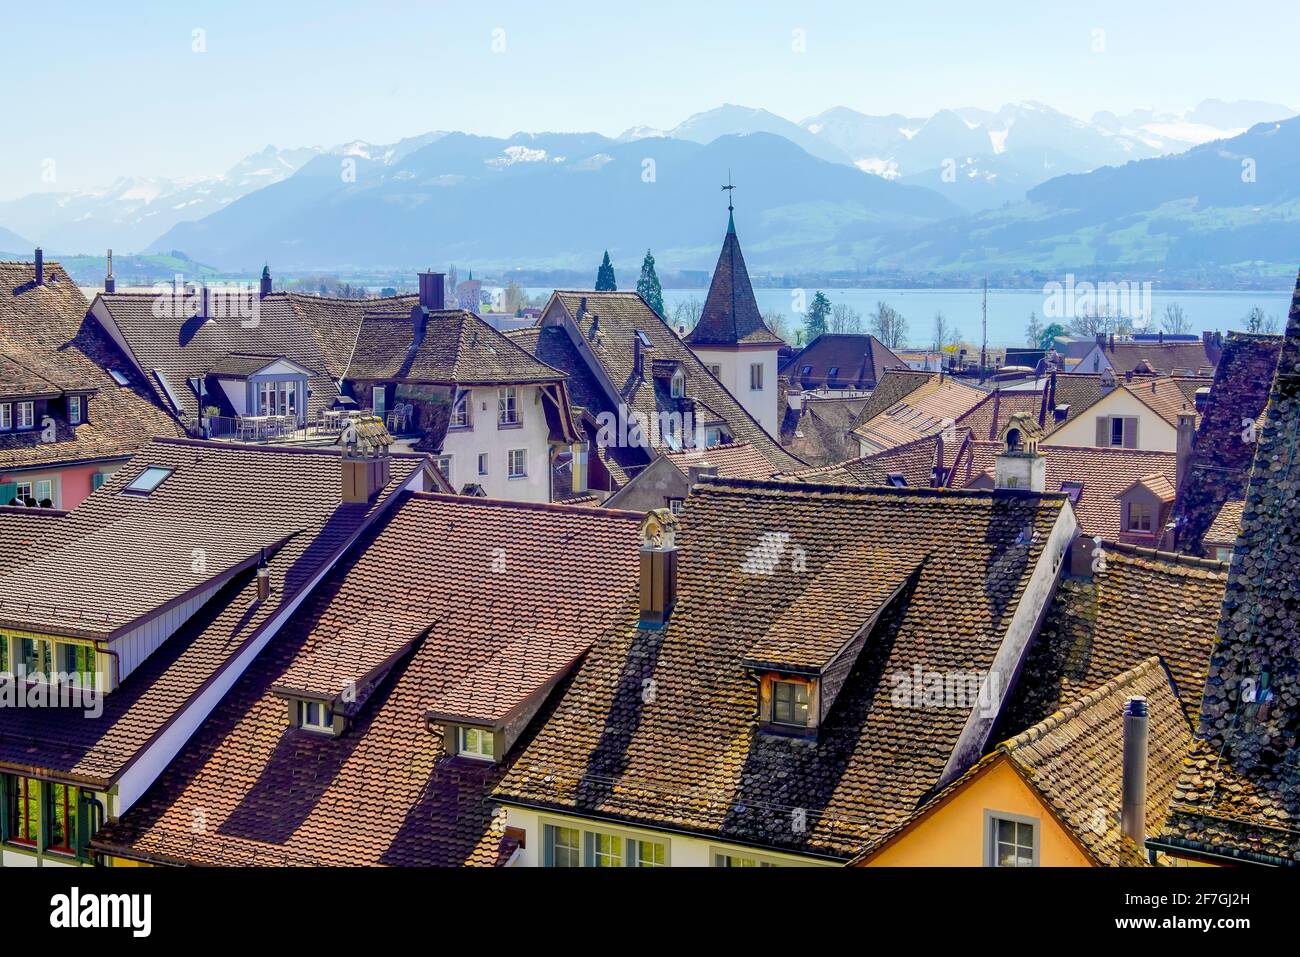 View of Rapperswil and Alpine landscape. Rapperswil-Jona, Canton of St. Gallen, Switzerland. Stock Photo